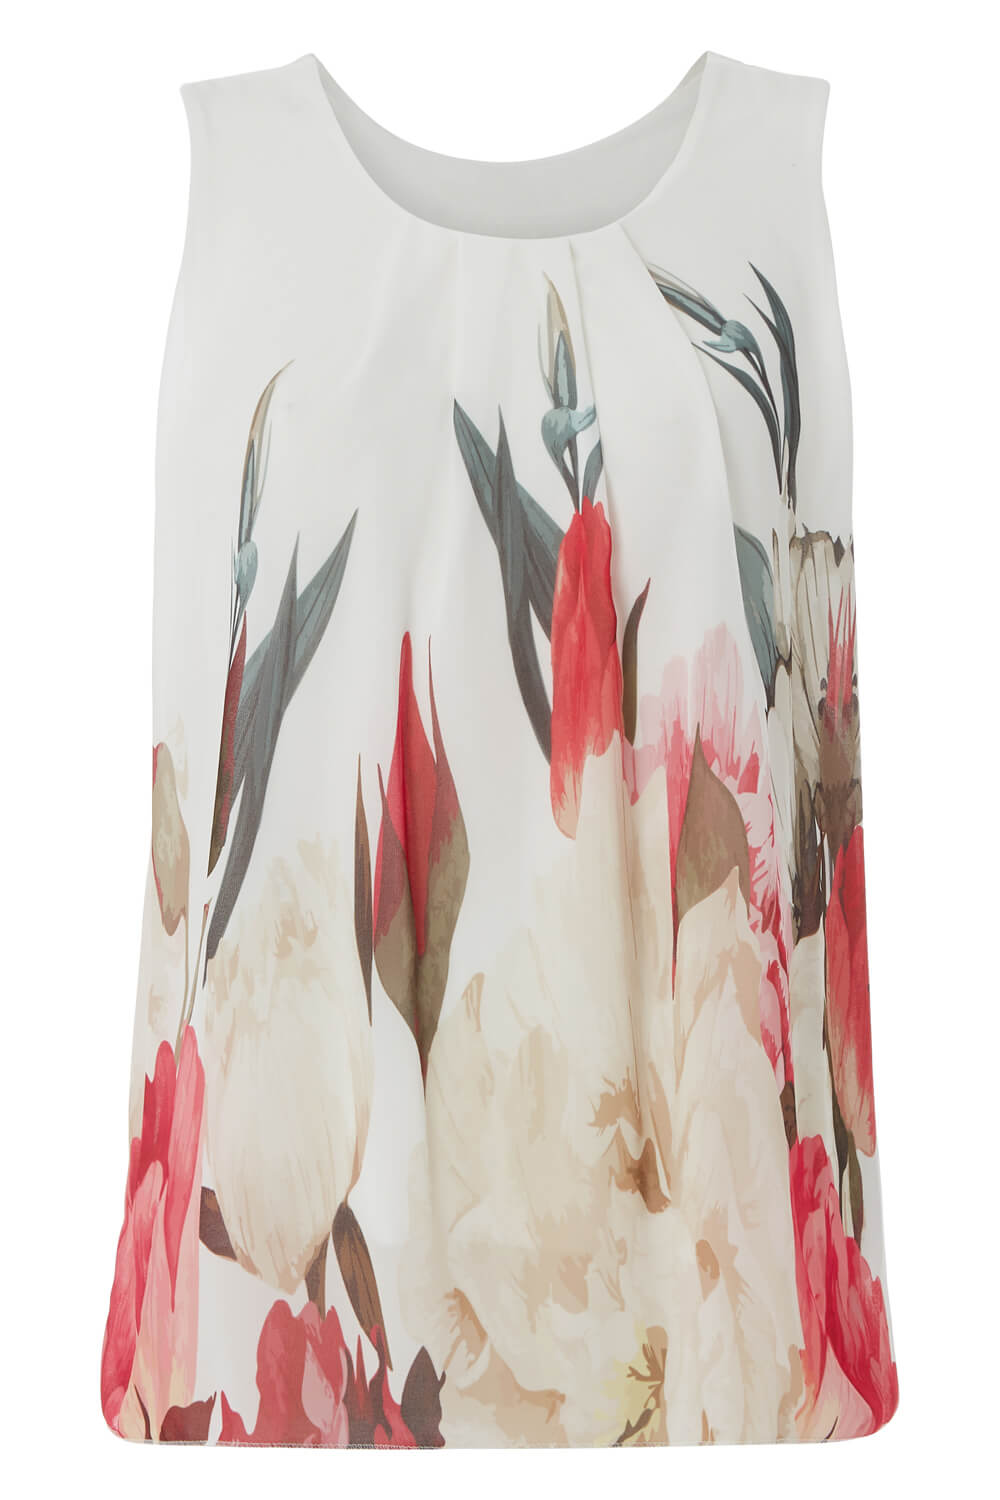 Ivory  Floral Sleeveless Overlay Top, Image 4 of 4